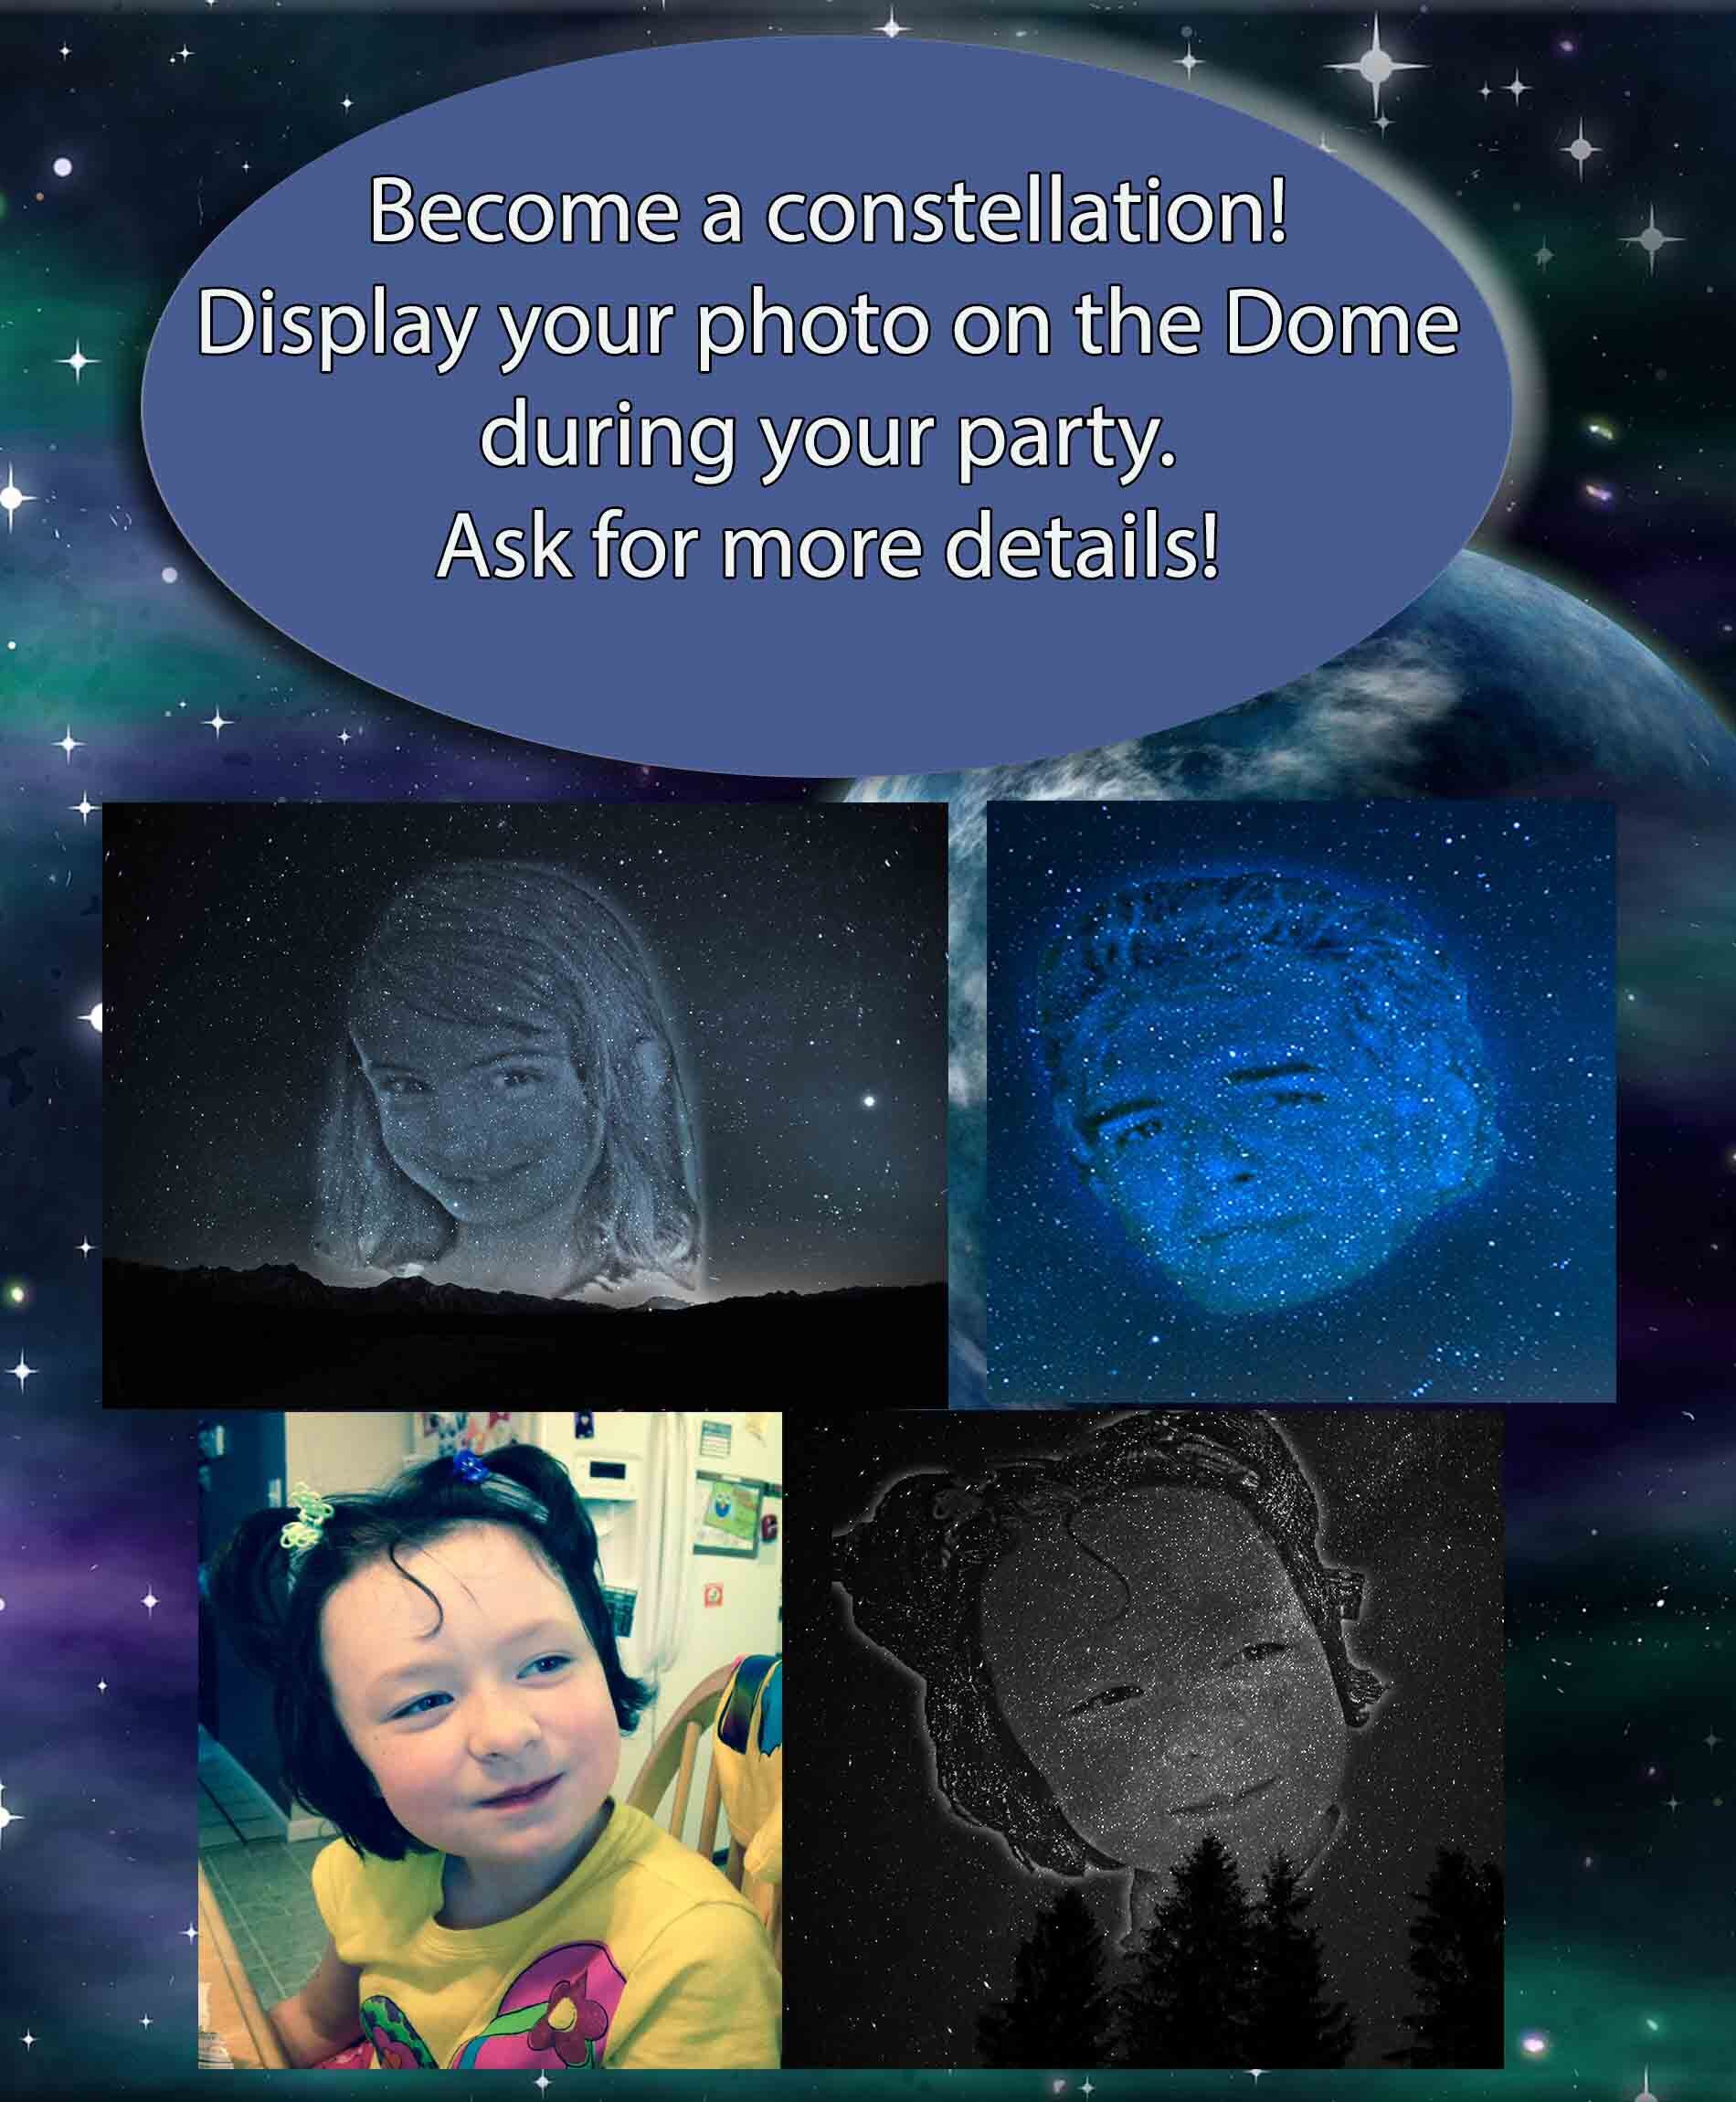 Become a constellation! Display your photo on the Dome during your party. Ask for more details!